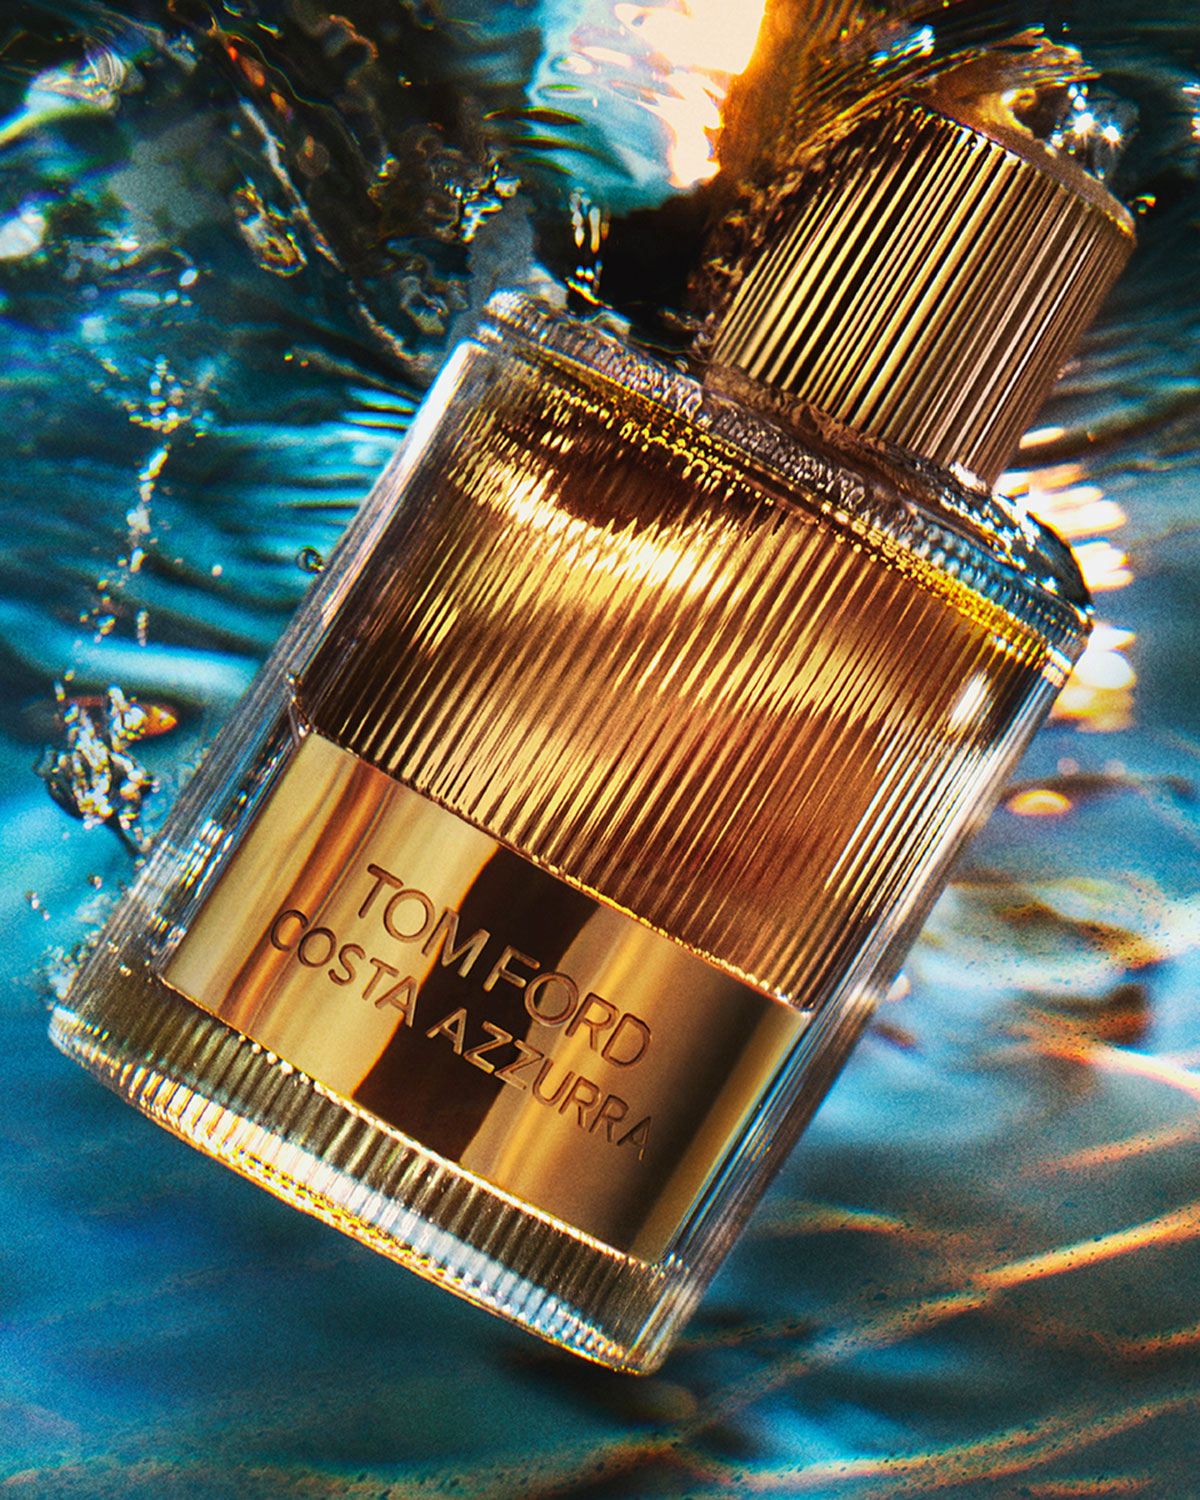 Tom Ford Costa Azzurra Signature new woody perfume guide to scents